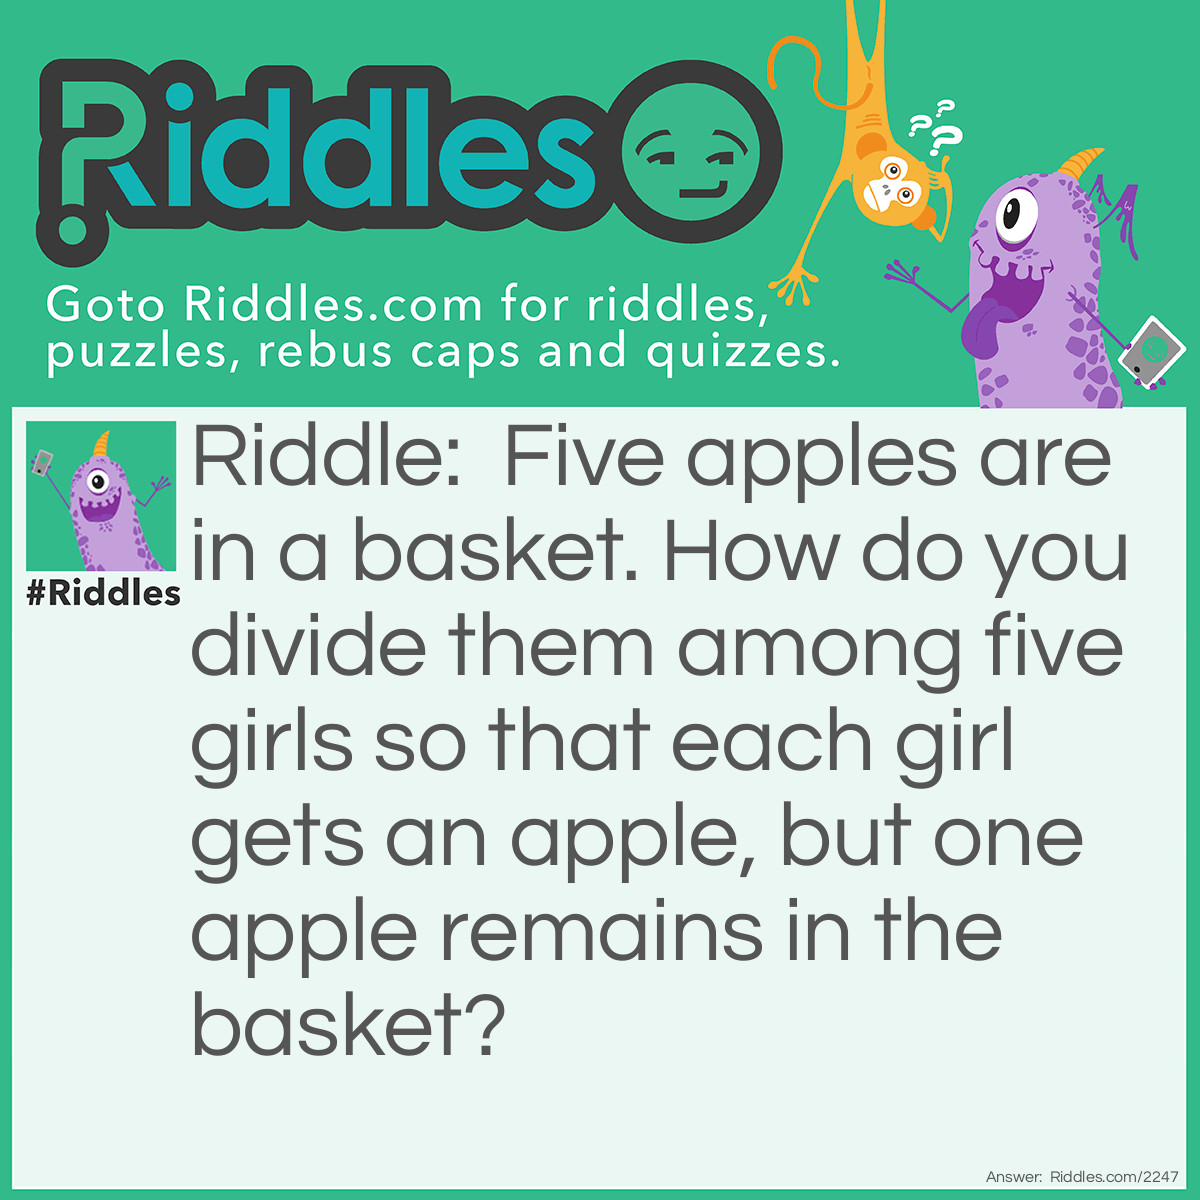 Riddle: Five apples are in a basket. How do you divide them among five girls so that each girl gets an apple, but one apple remains in the basket? Answer: Give the fifth girl her apple in the basket.